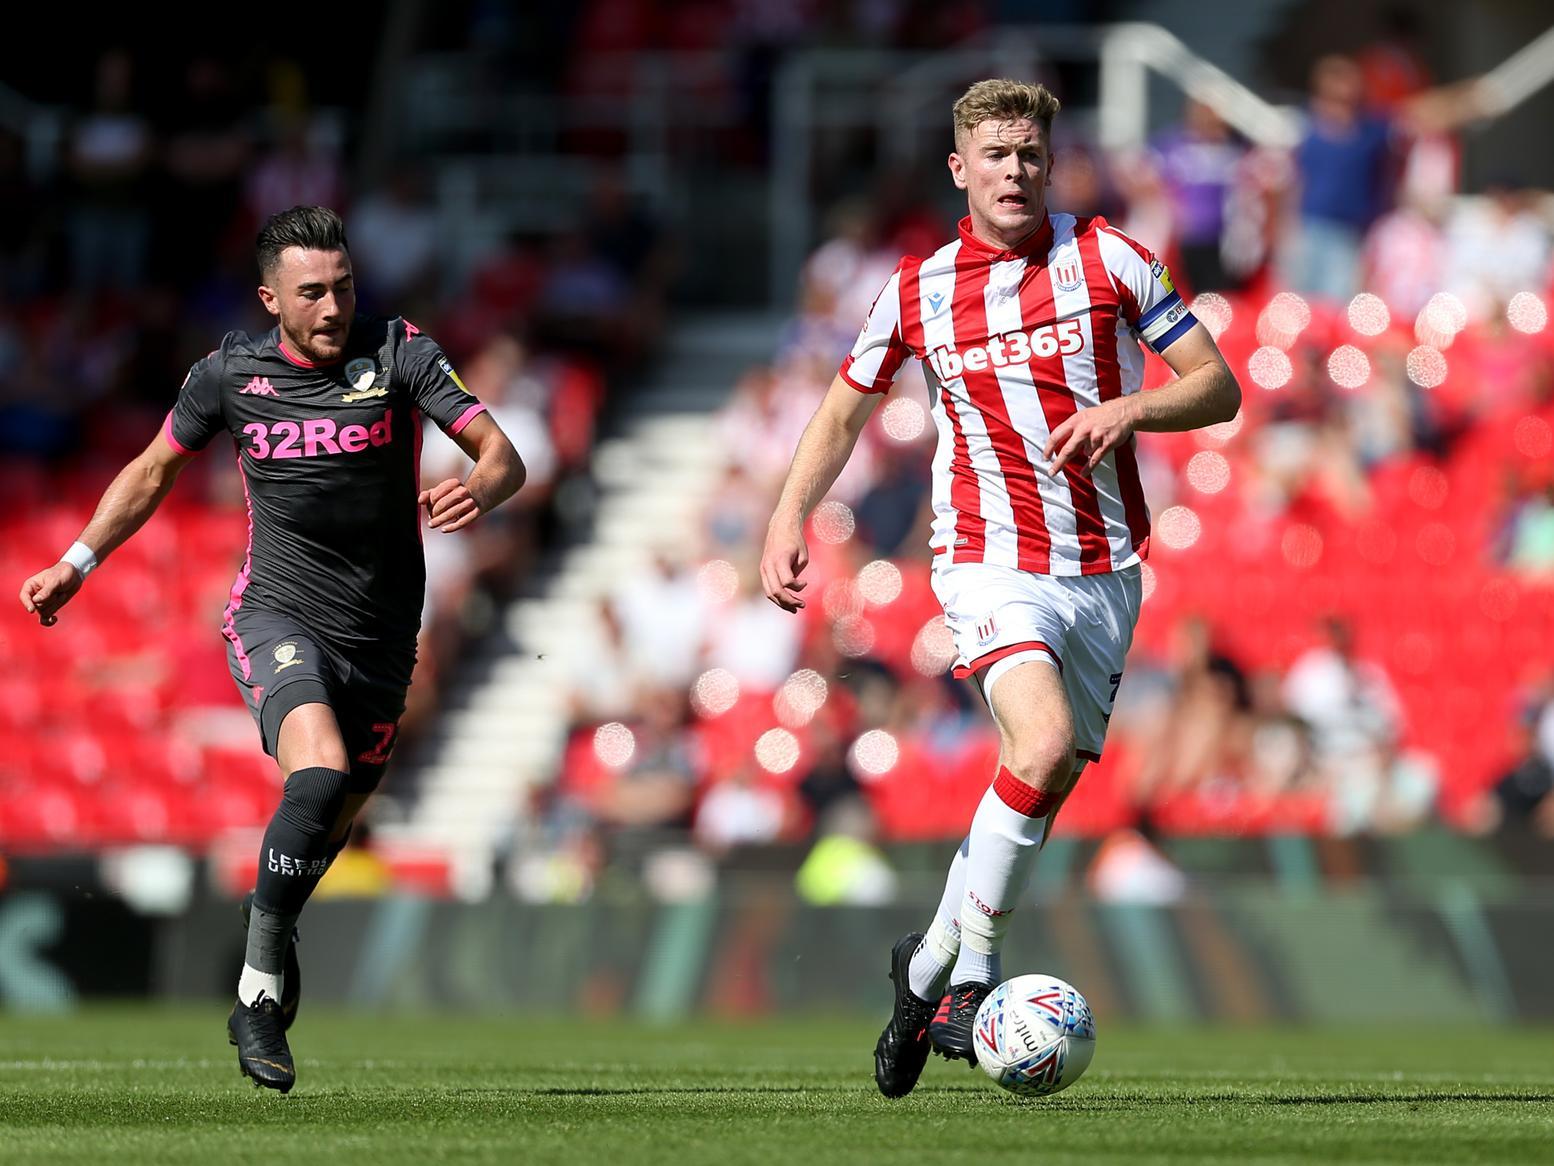 Manchester United are reportedly keeping tabs on Stoke City's teenage defender Nathan Collins, who has already been capped twice by the Republic of Ireland senior side. (Sky Sports)